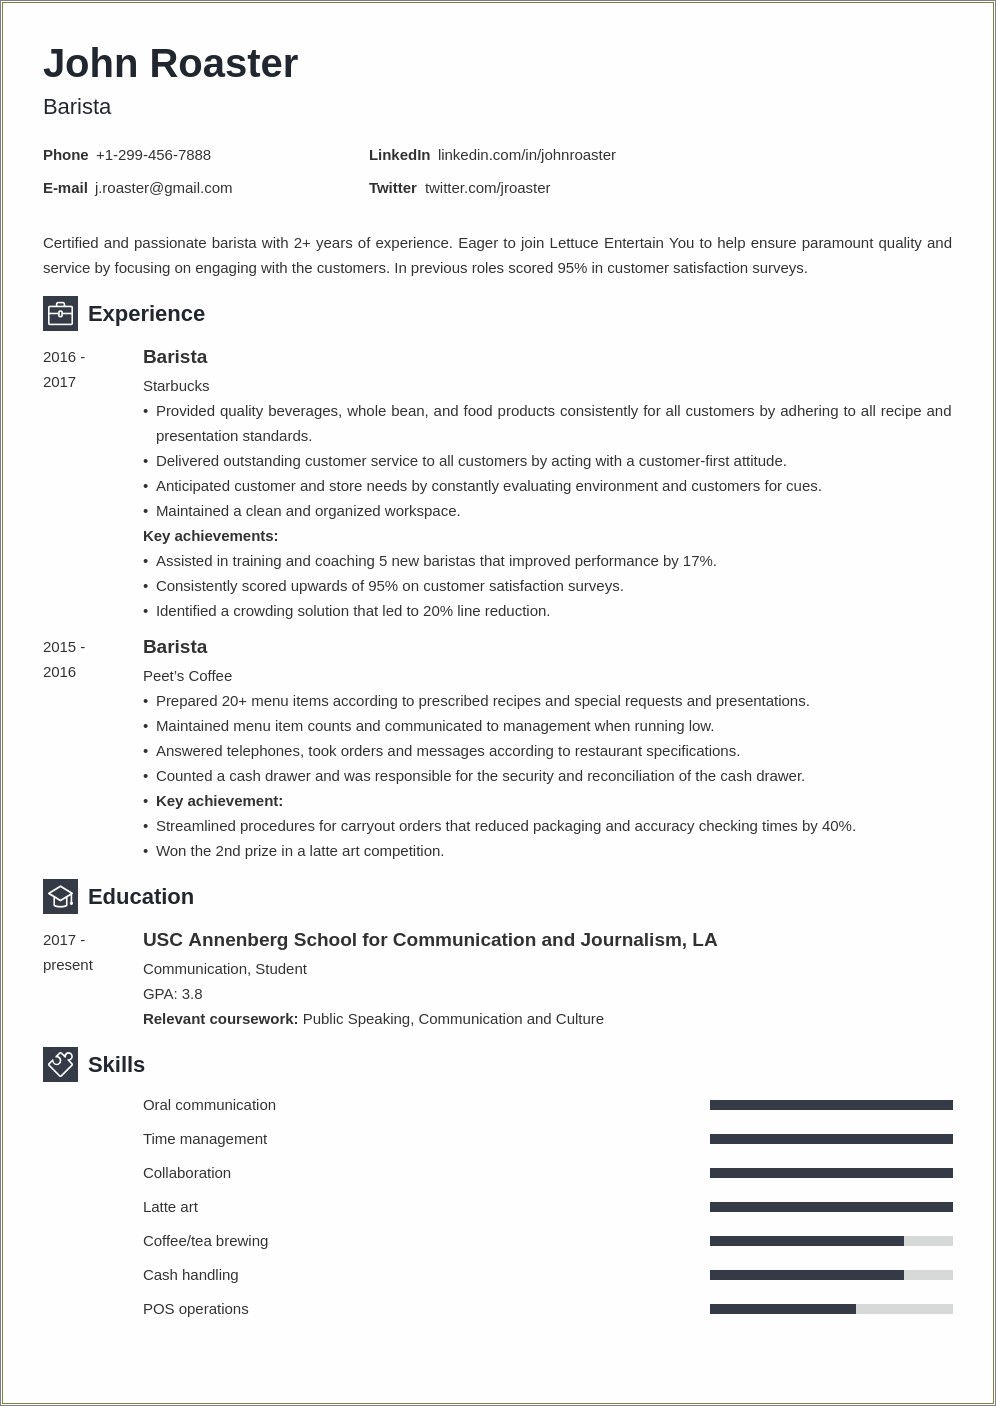 Do You Add Hands On Experiences In Resume